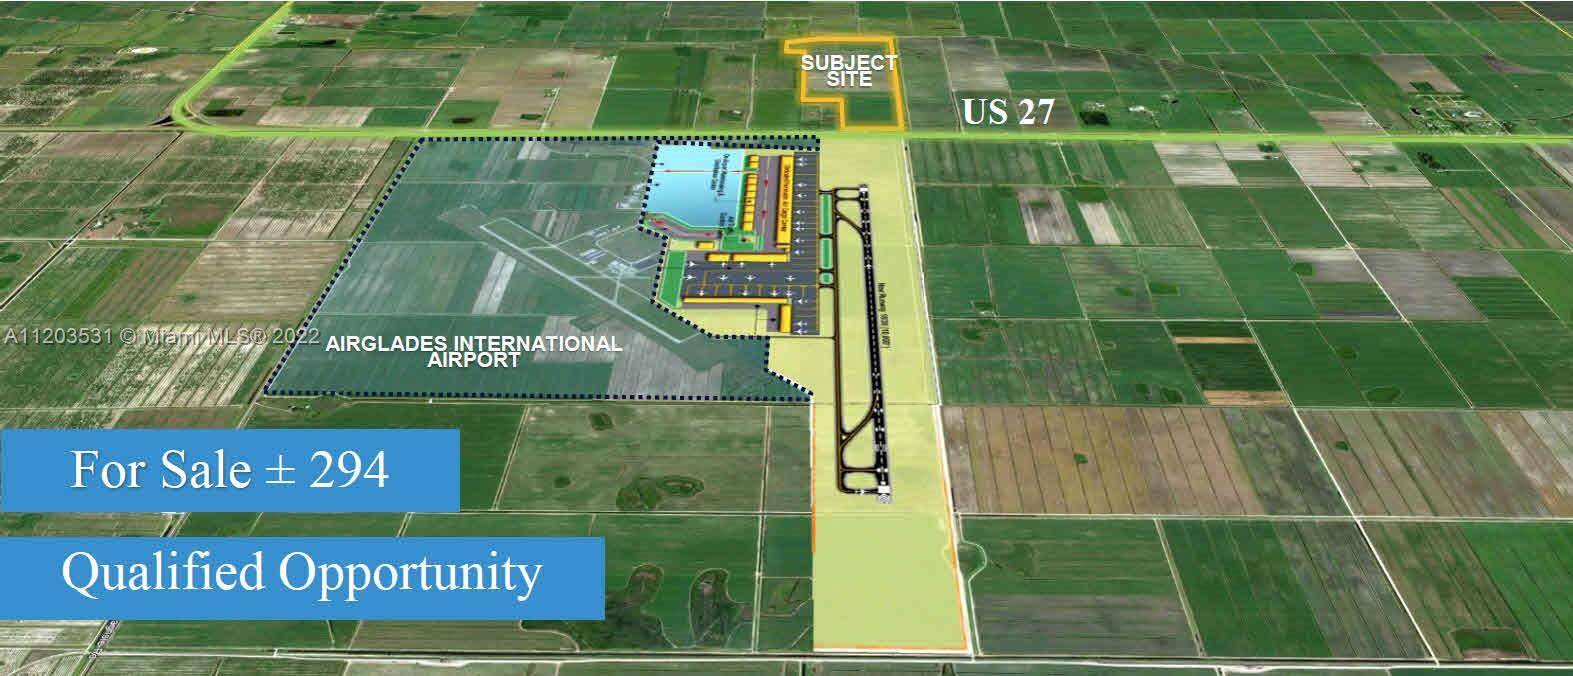 294 Acres FOR SALE DIRECTLY ACROSS FROM FLORIDA S NEWEST CARGO AIRPORT US 27 FRONTAGE OUTSTANDING OPPORTUNITY FOR DEVELOPERS, MANUFACTURING, FREIGHT FORWARDERS, PERISHABLES INDUSTRIAL USERS ?